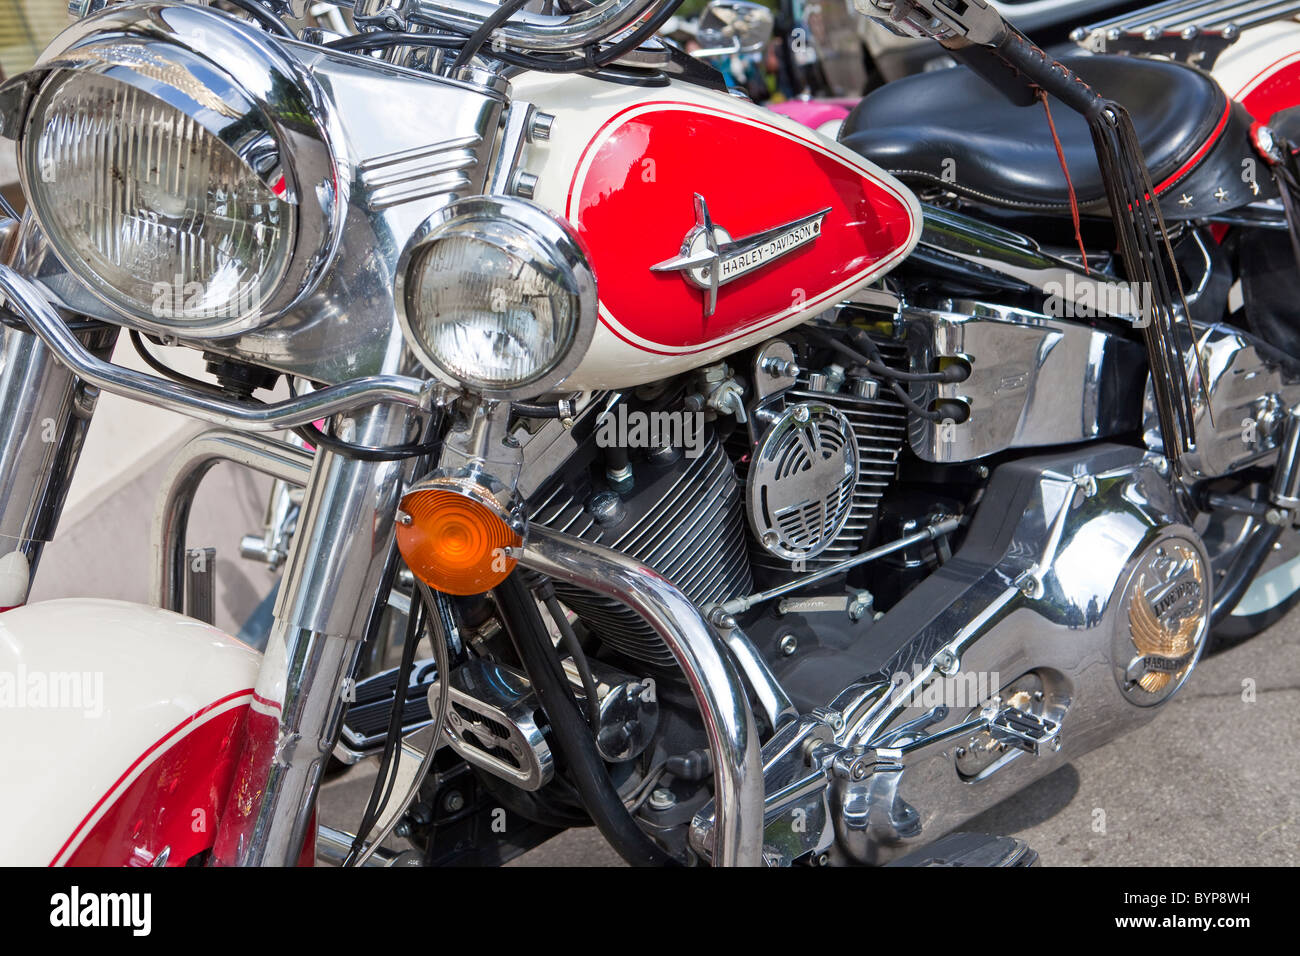 Page 2 - Harley Davidson Bike High Resolution Stock Photography and Images  - Alamy